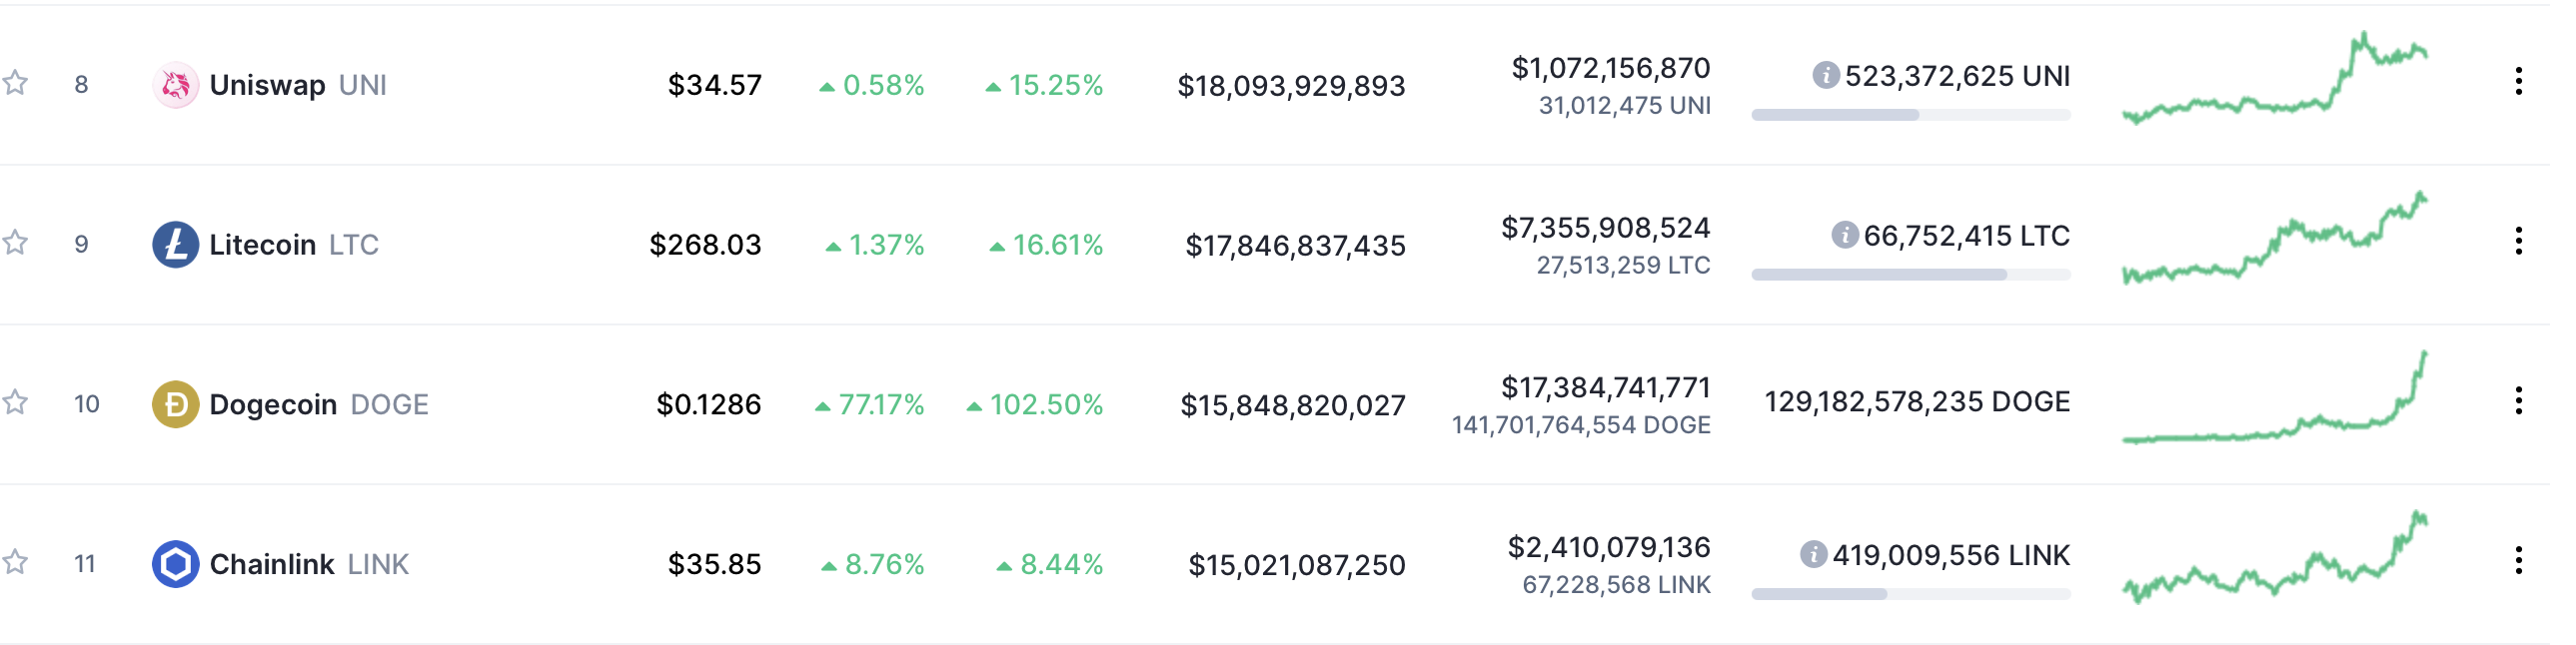 Dogecoin climbed to 10th place in terms of capitalization